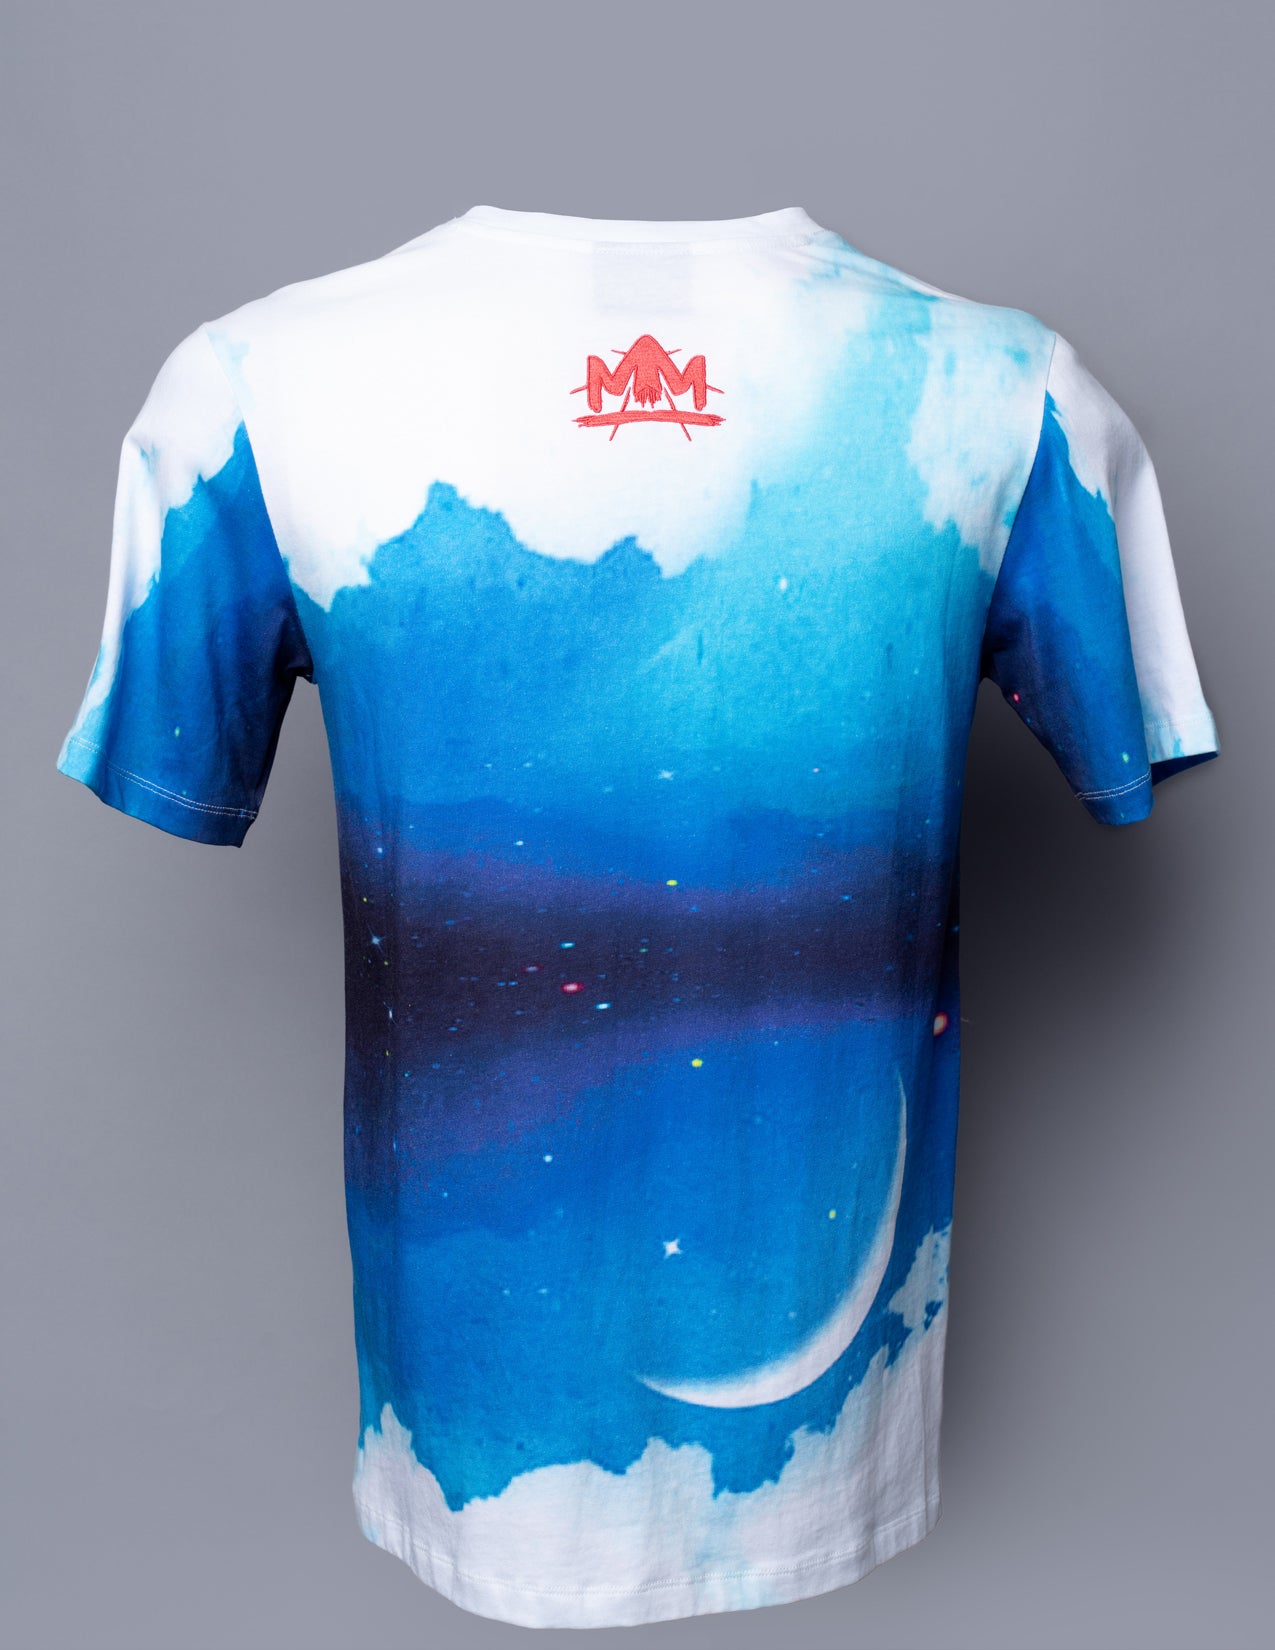 Dreaming All-Over Print Shirt - Signedbymcfly